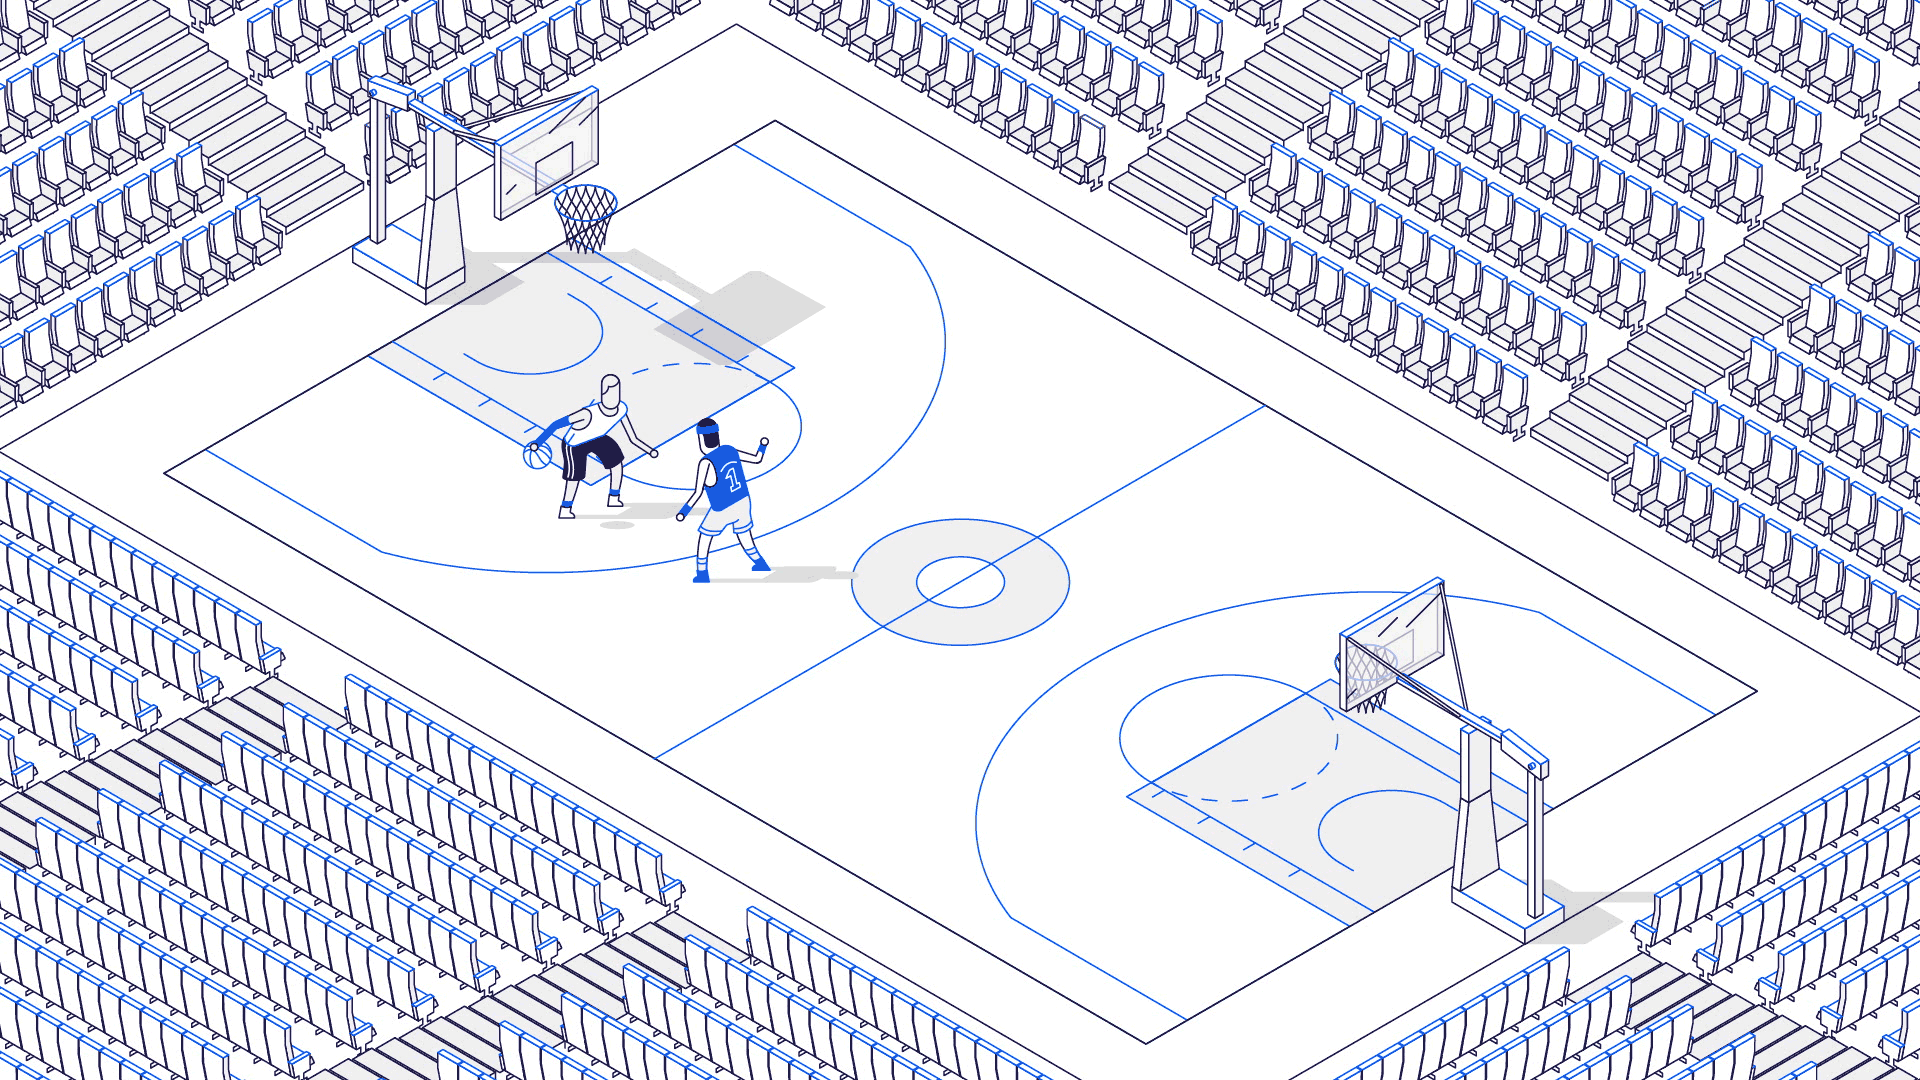 Animated loop of two basketball players on an empty stadium